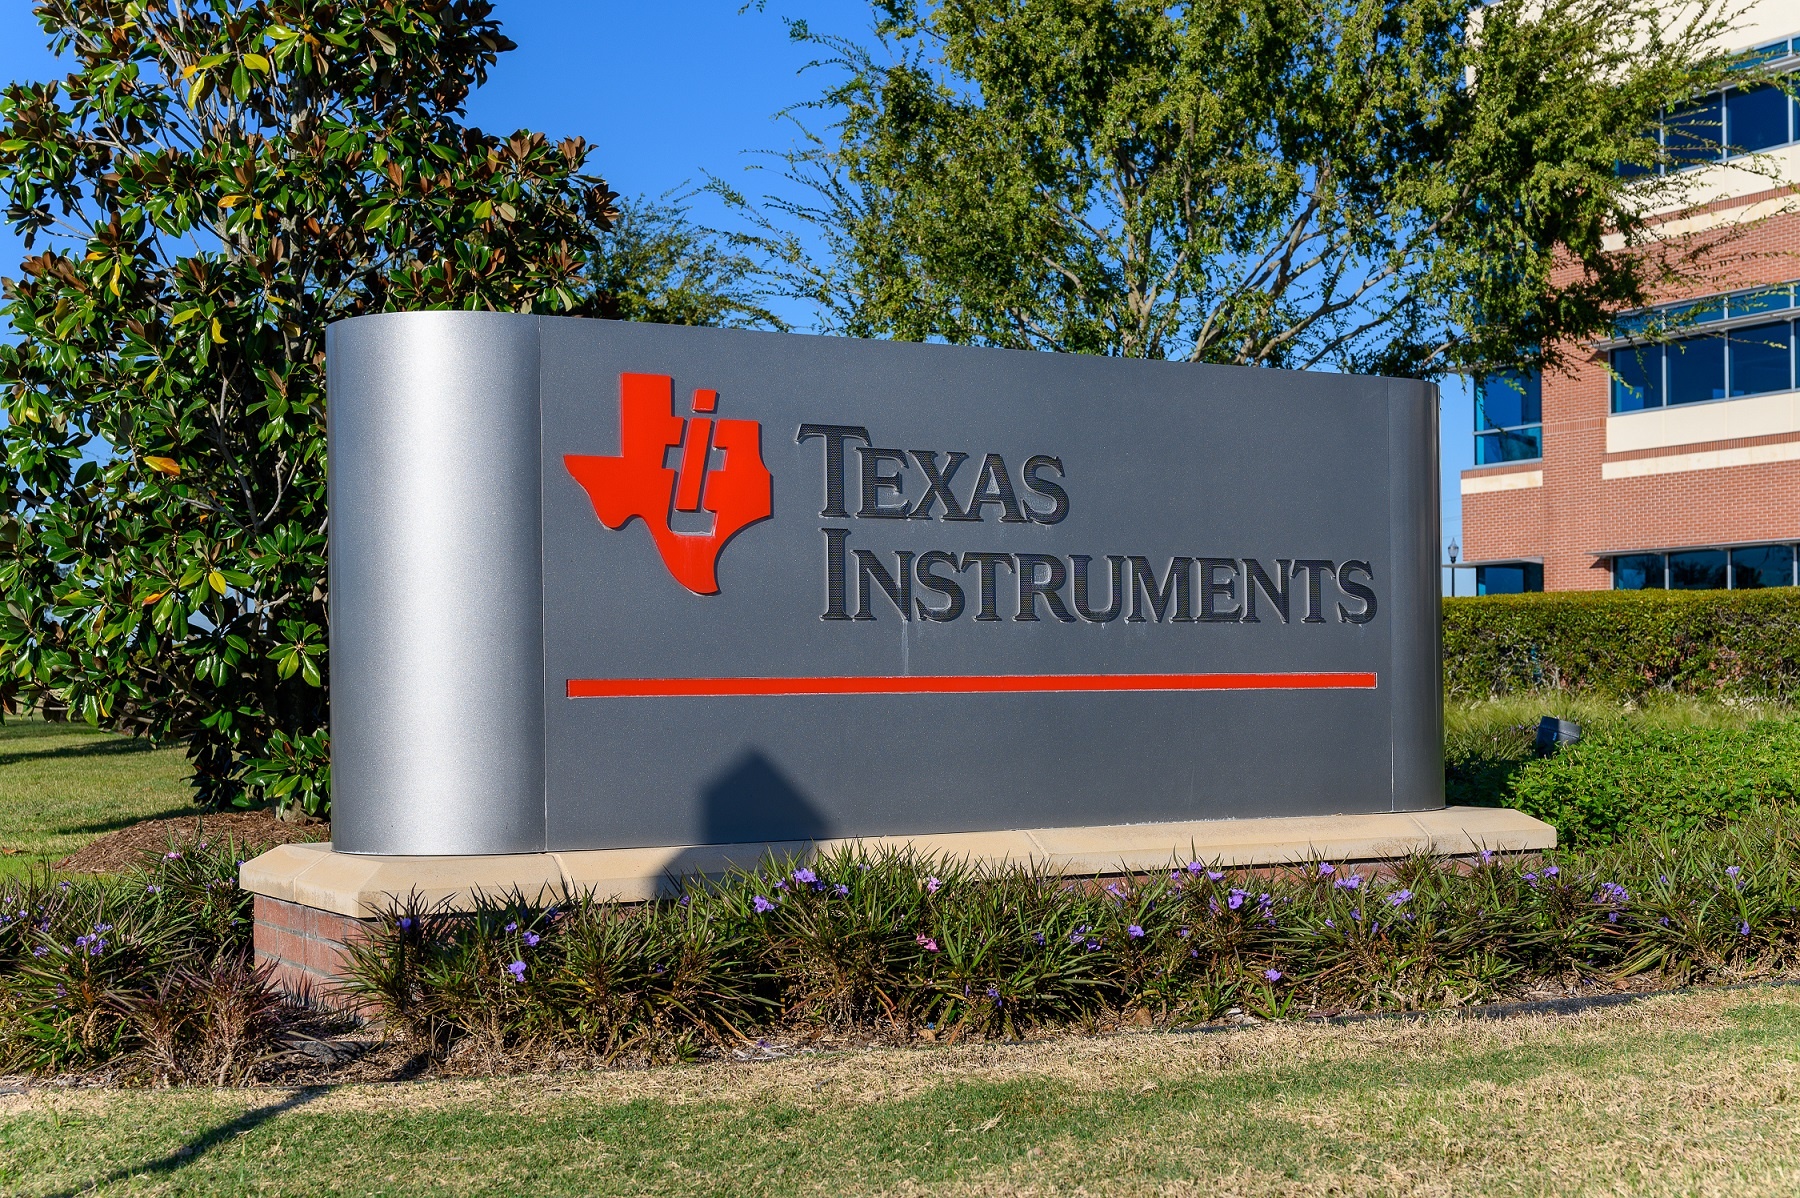 Texas Instruments Q2 earnings report exceeds expectations